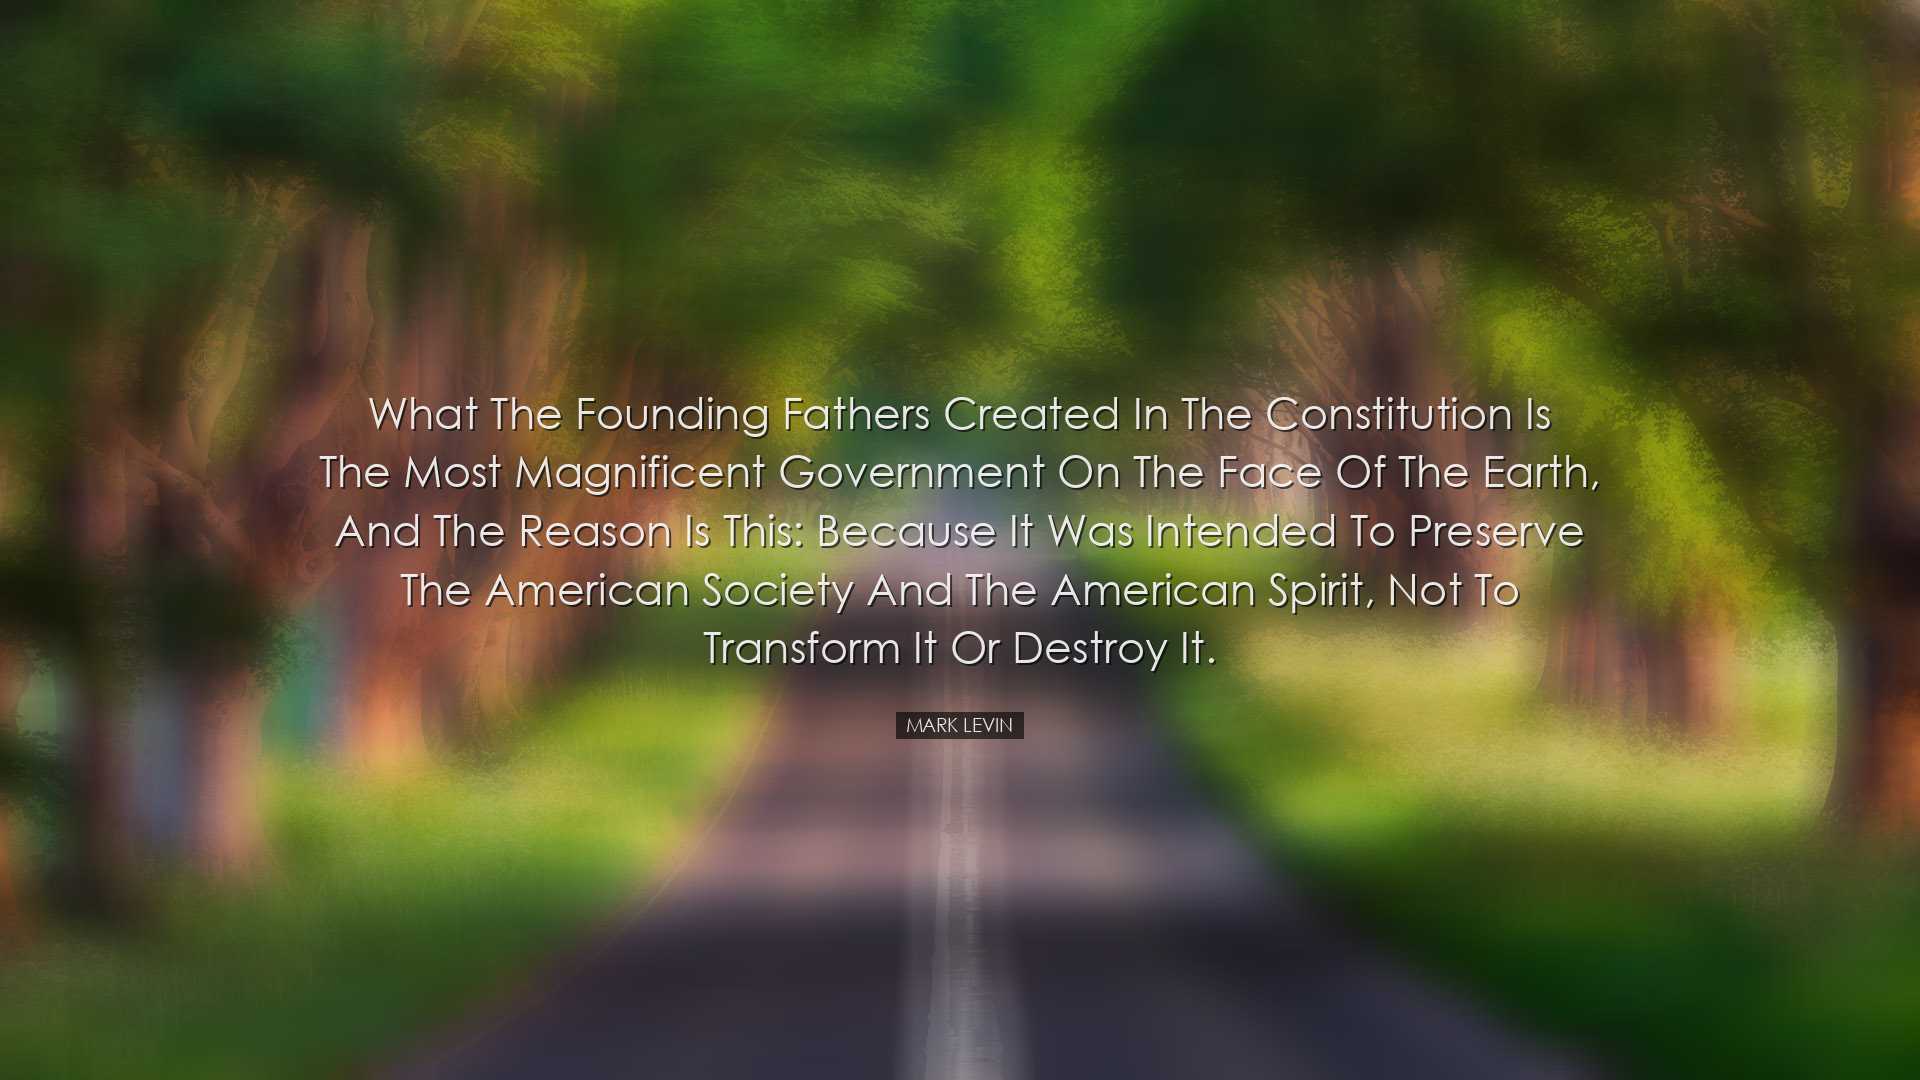 What the Founding Fathers created in the Constitution is the most